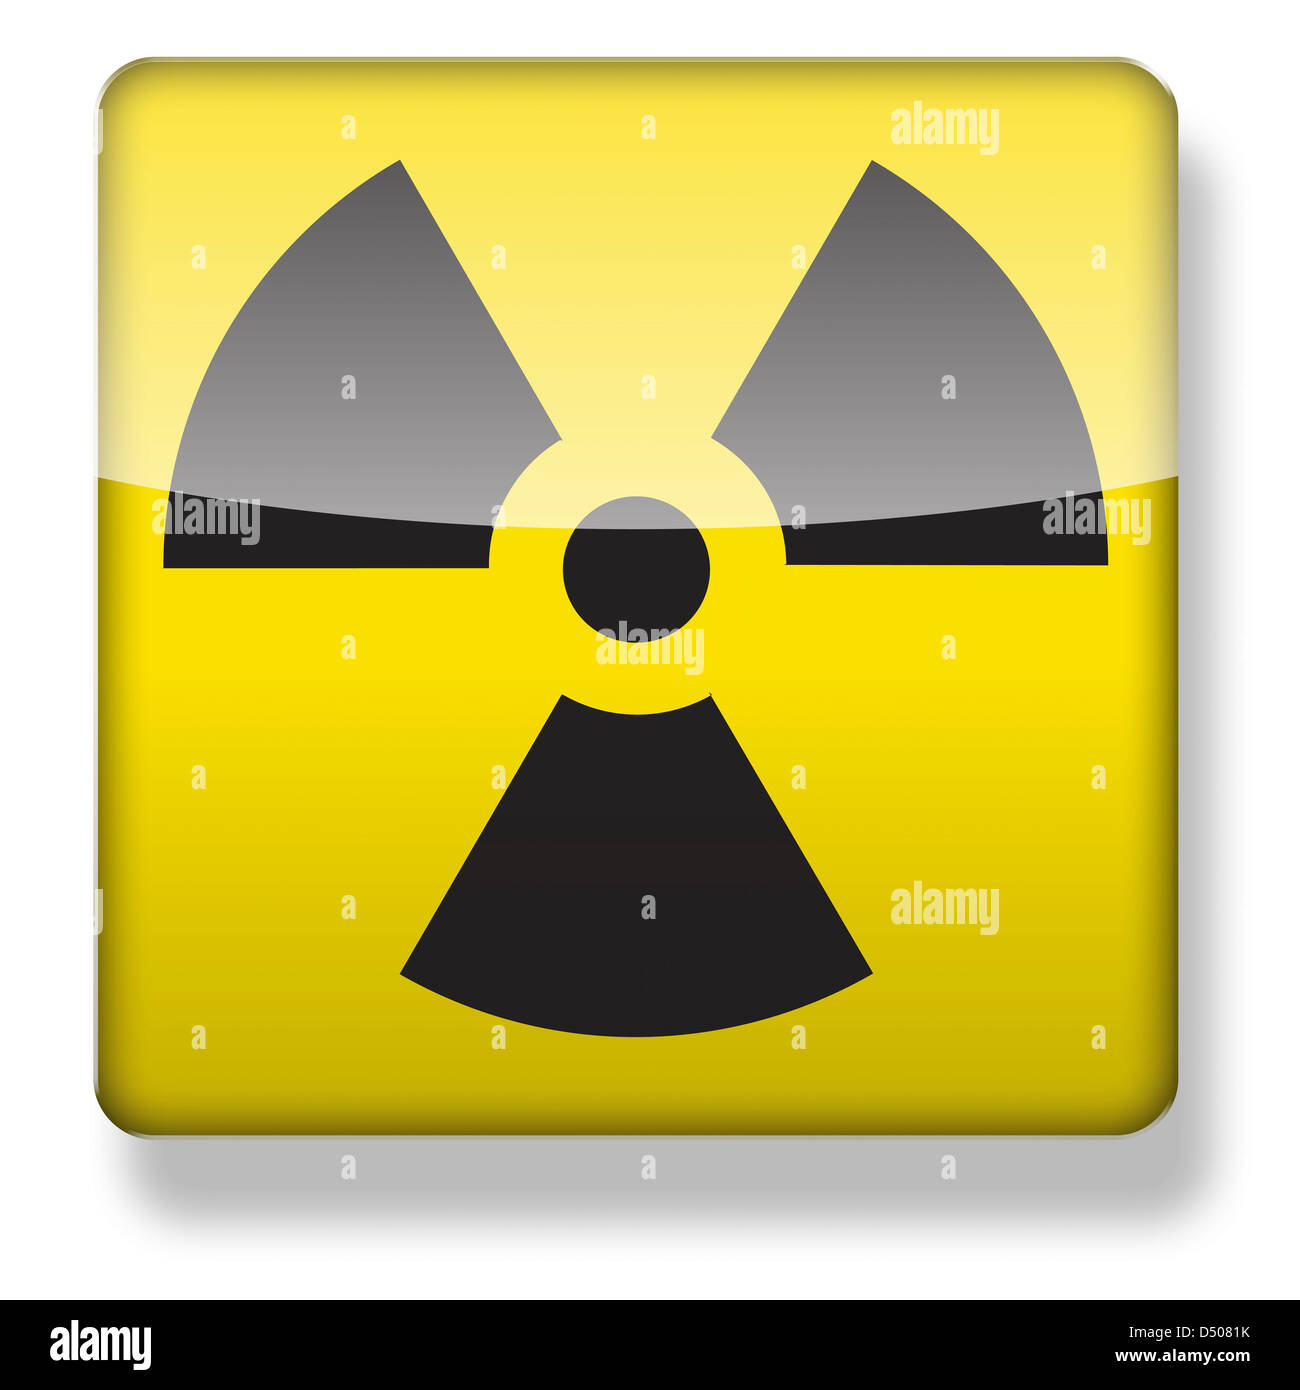 Radioactive logo as an app icon. Clipping path included. Stock Photo